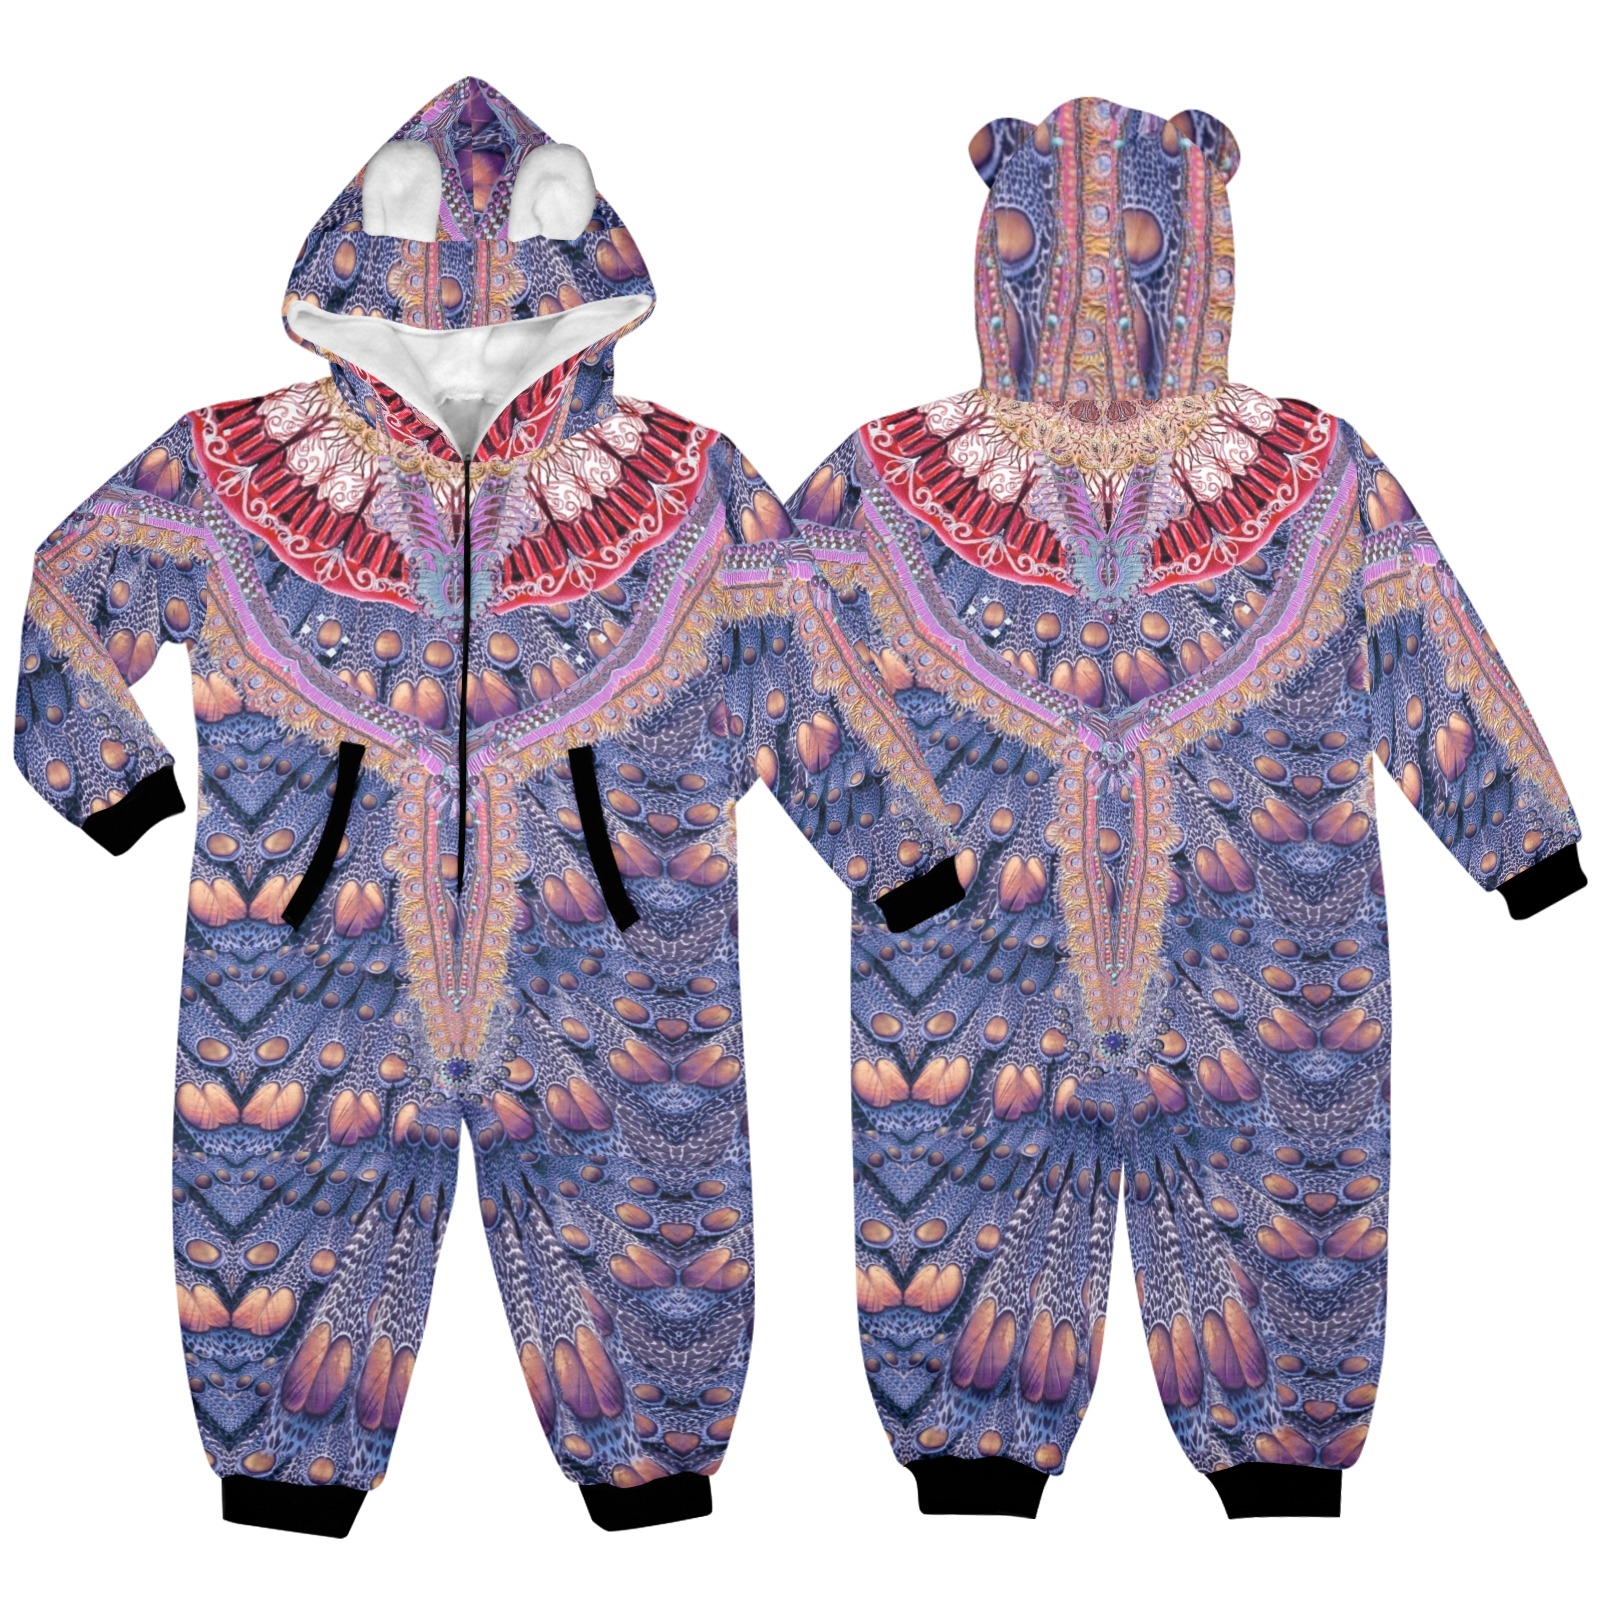 spain blue One-Piece Zip up Hooded Pajamas for Little Kids